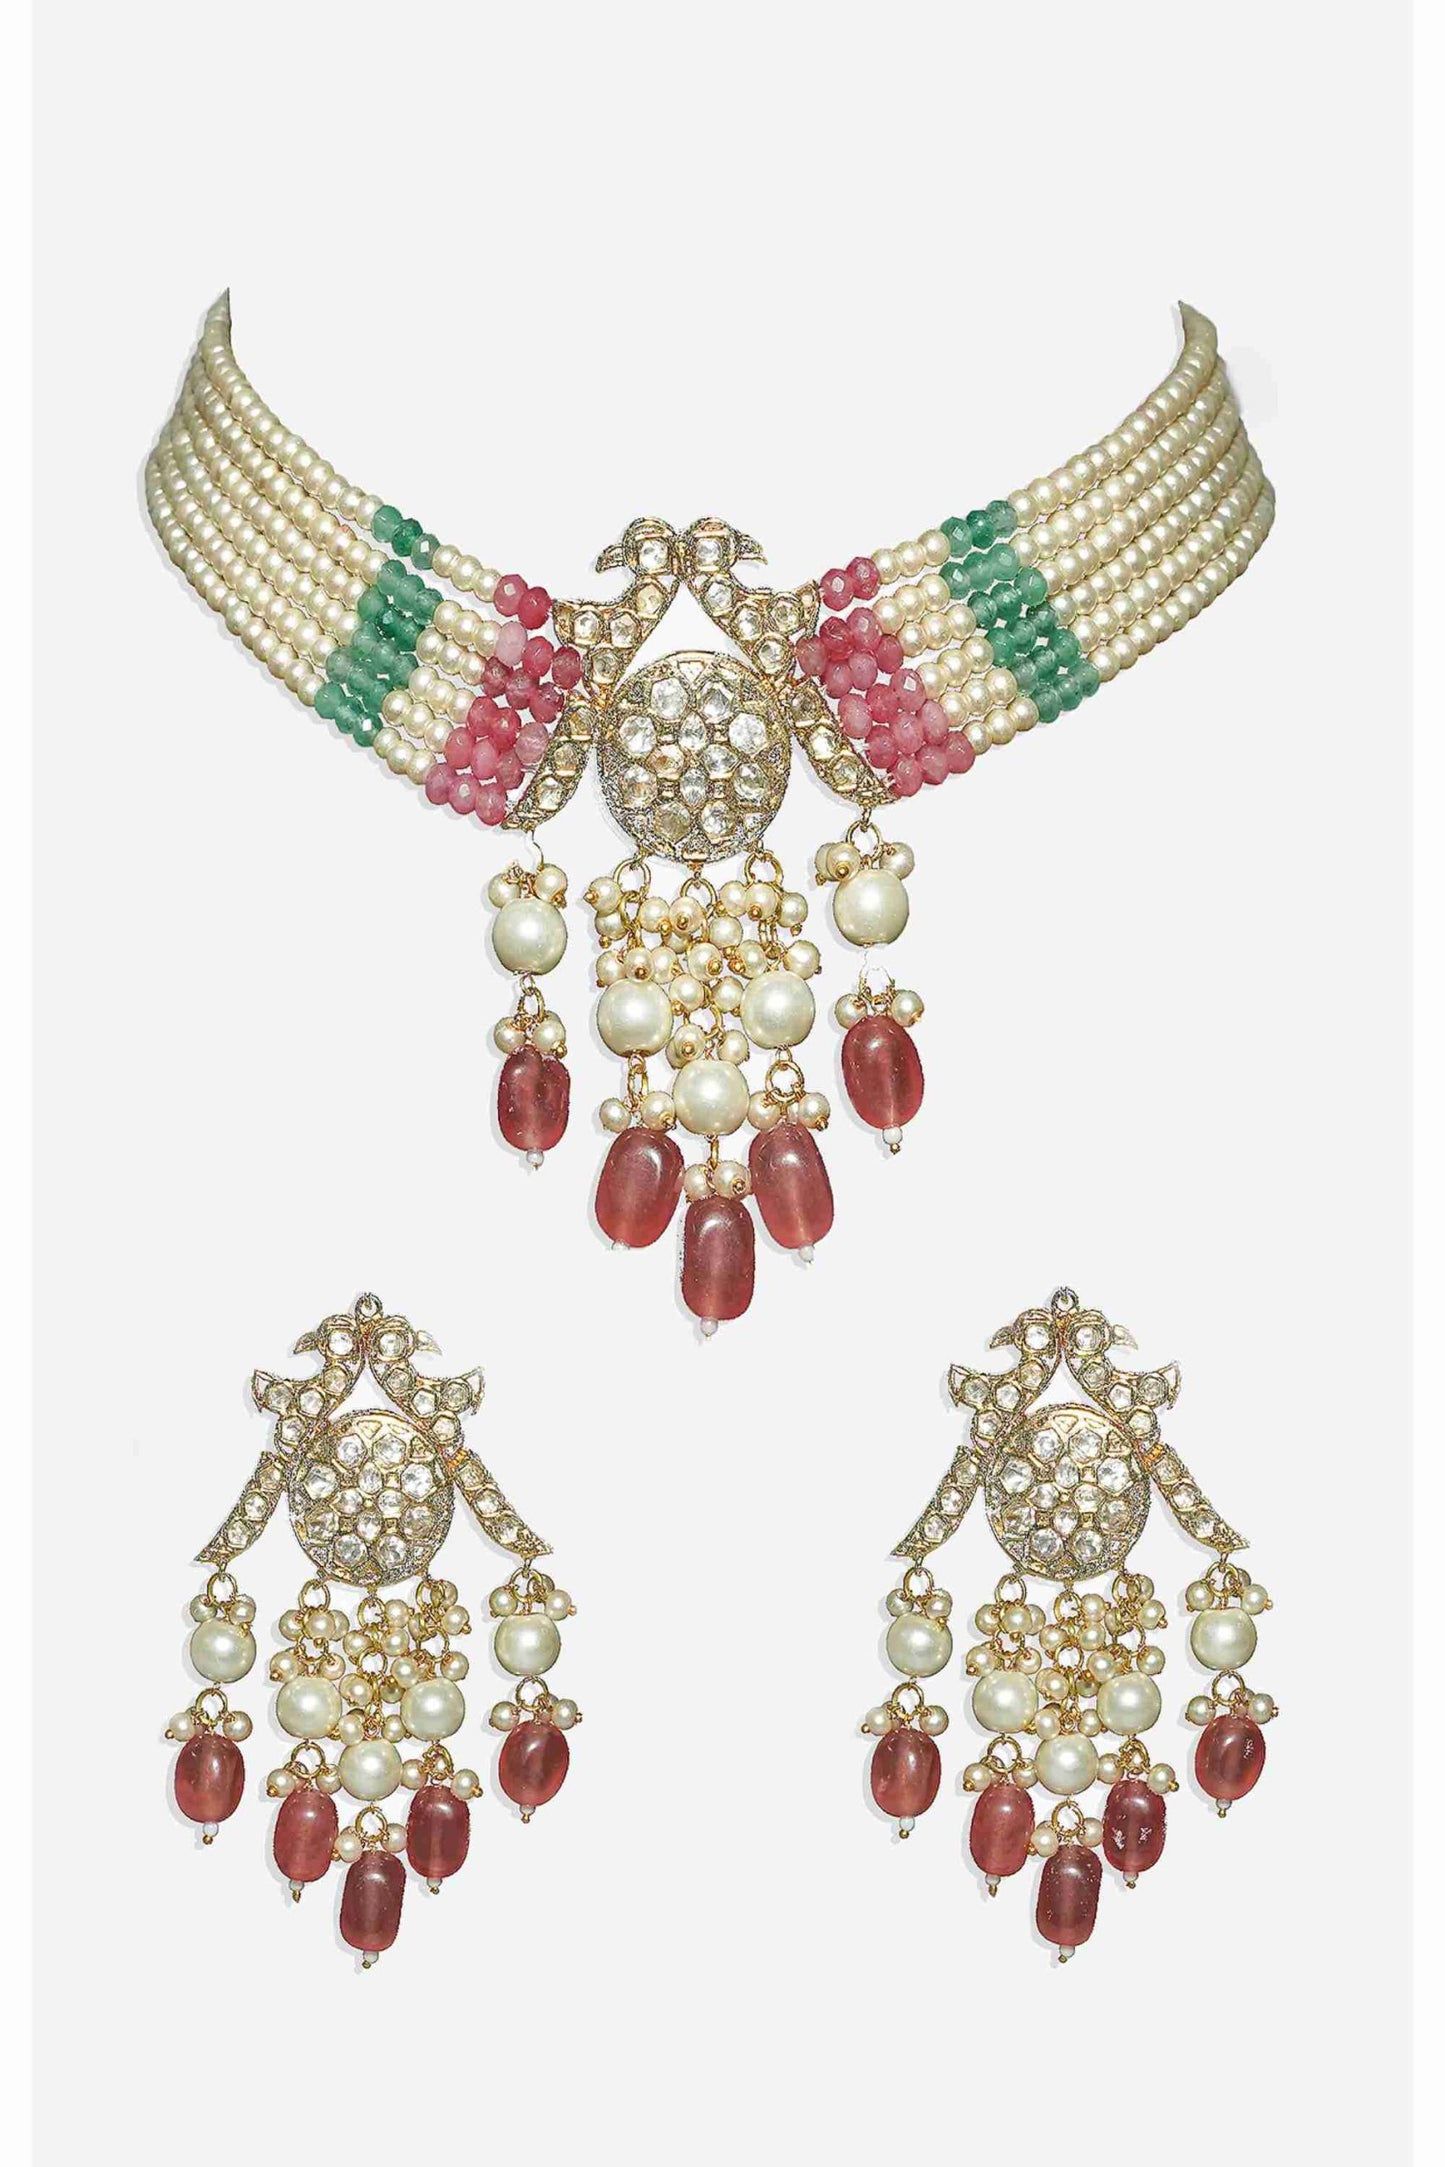 Exquisite Gold Plated Kundan Necklace Set